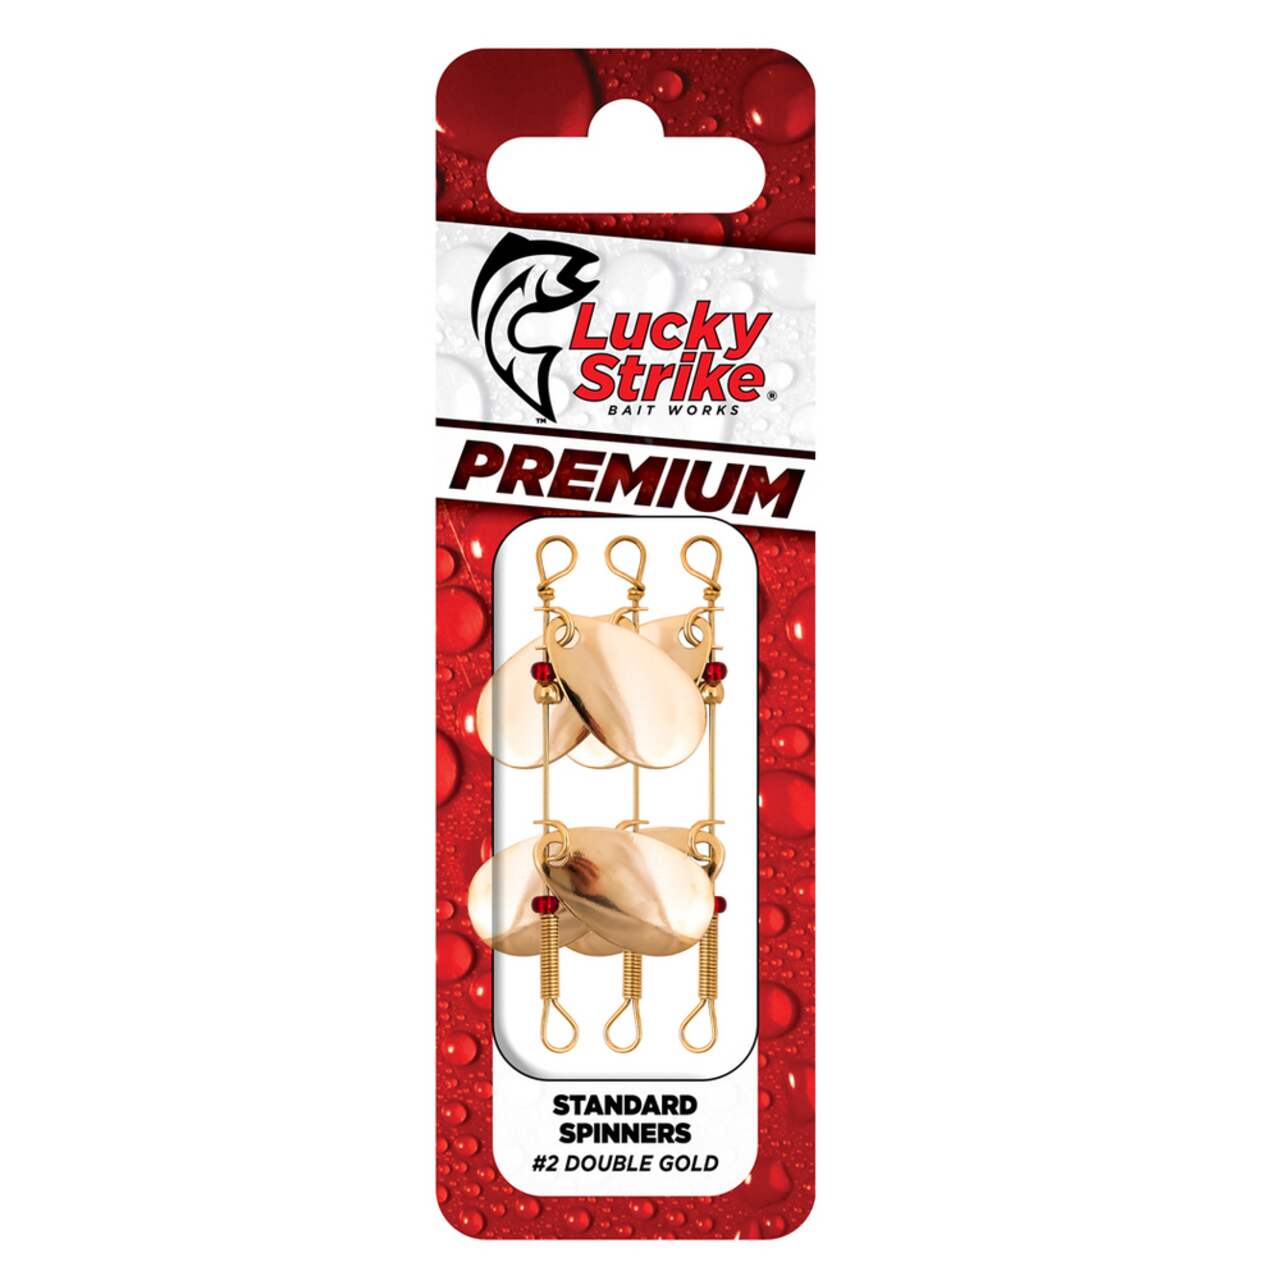 https://media-www.canadiantire.ca/product/playing/fishing/fishing-lures/0777668/lucky-strike-spinner-double-gold-size-2-3-pack-dbbb1eee-6f0c-416a-9dae-bf1d0291dcea.png?imdensity=1&imwidth=640&impolicy=mZoom